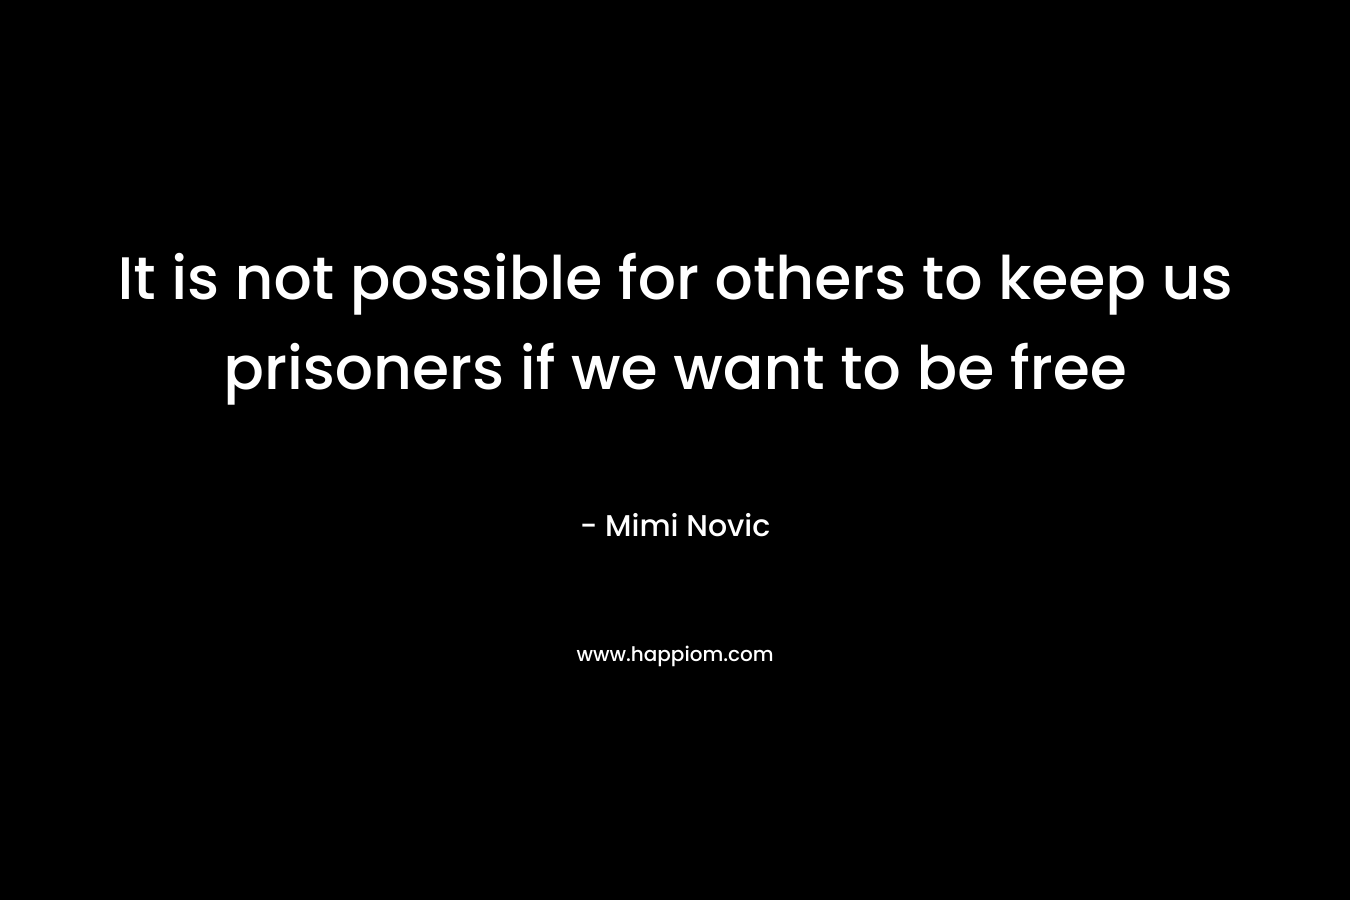 It is not possible for others to keep us prisoners if we want to be free